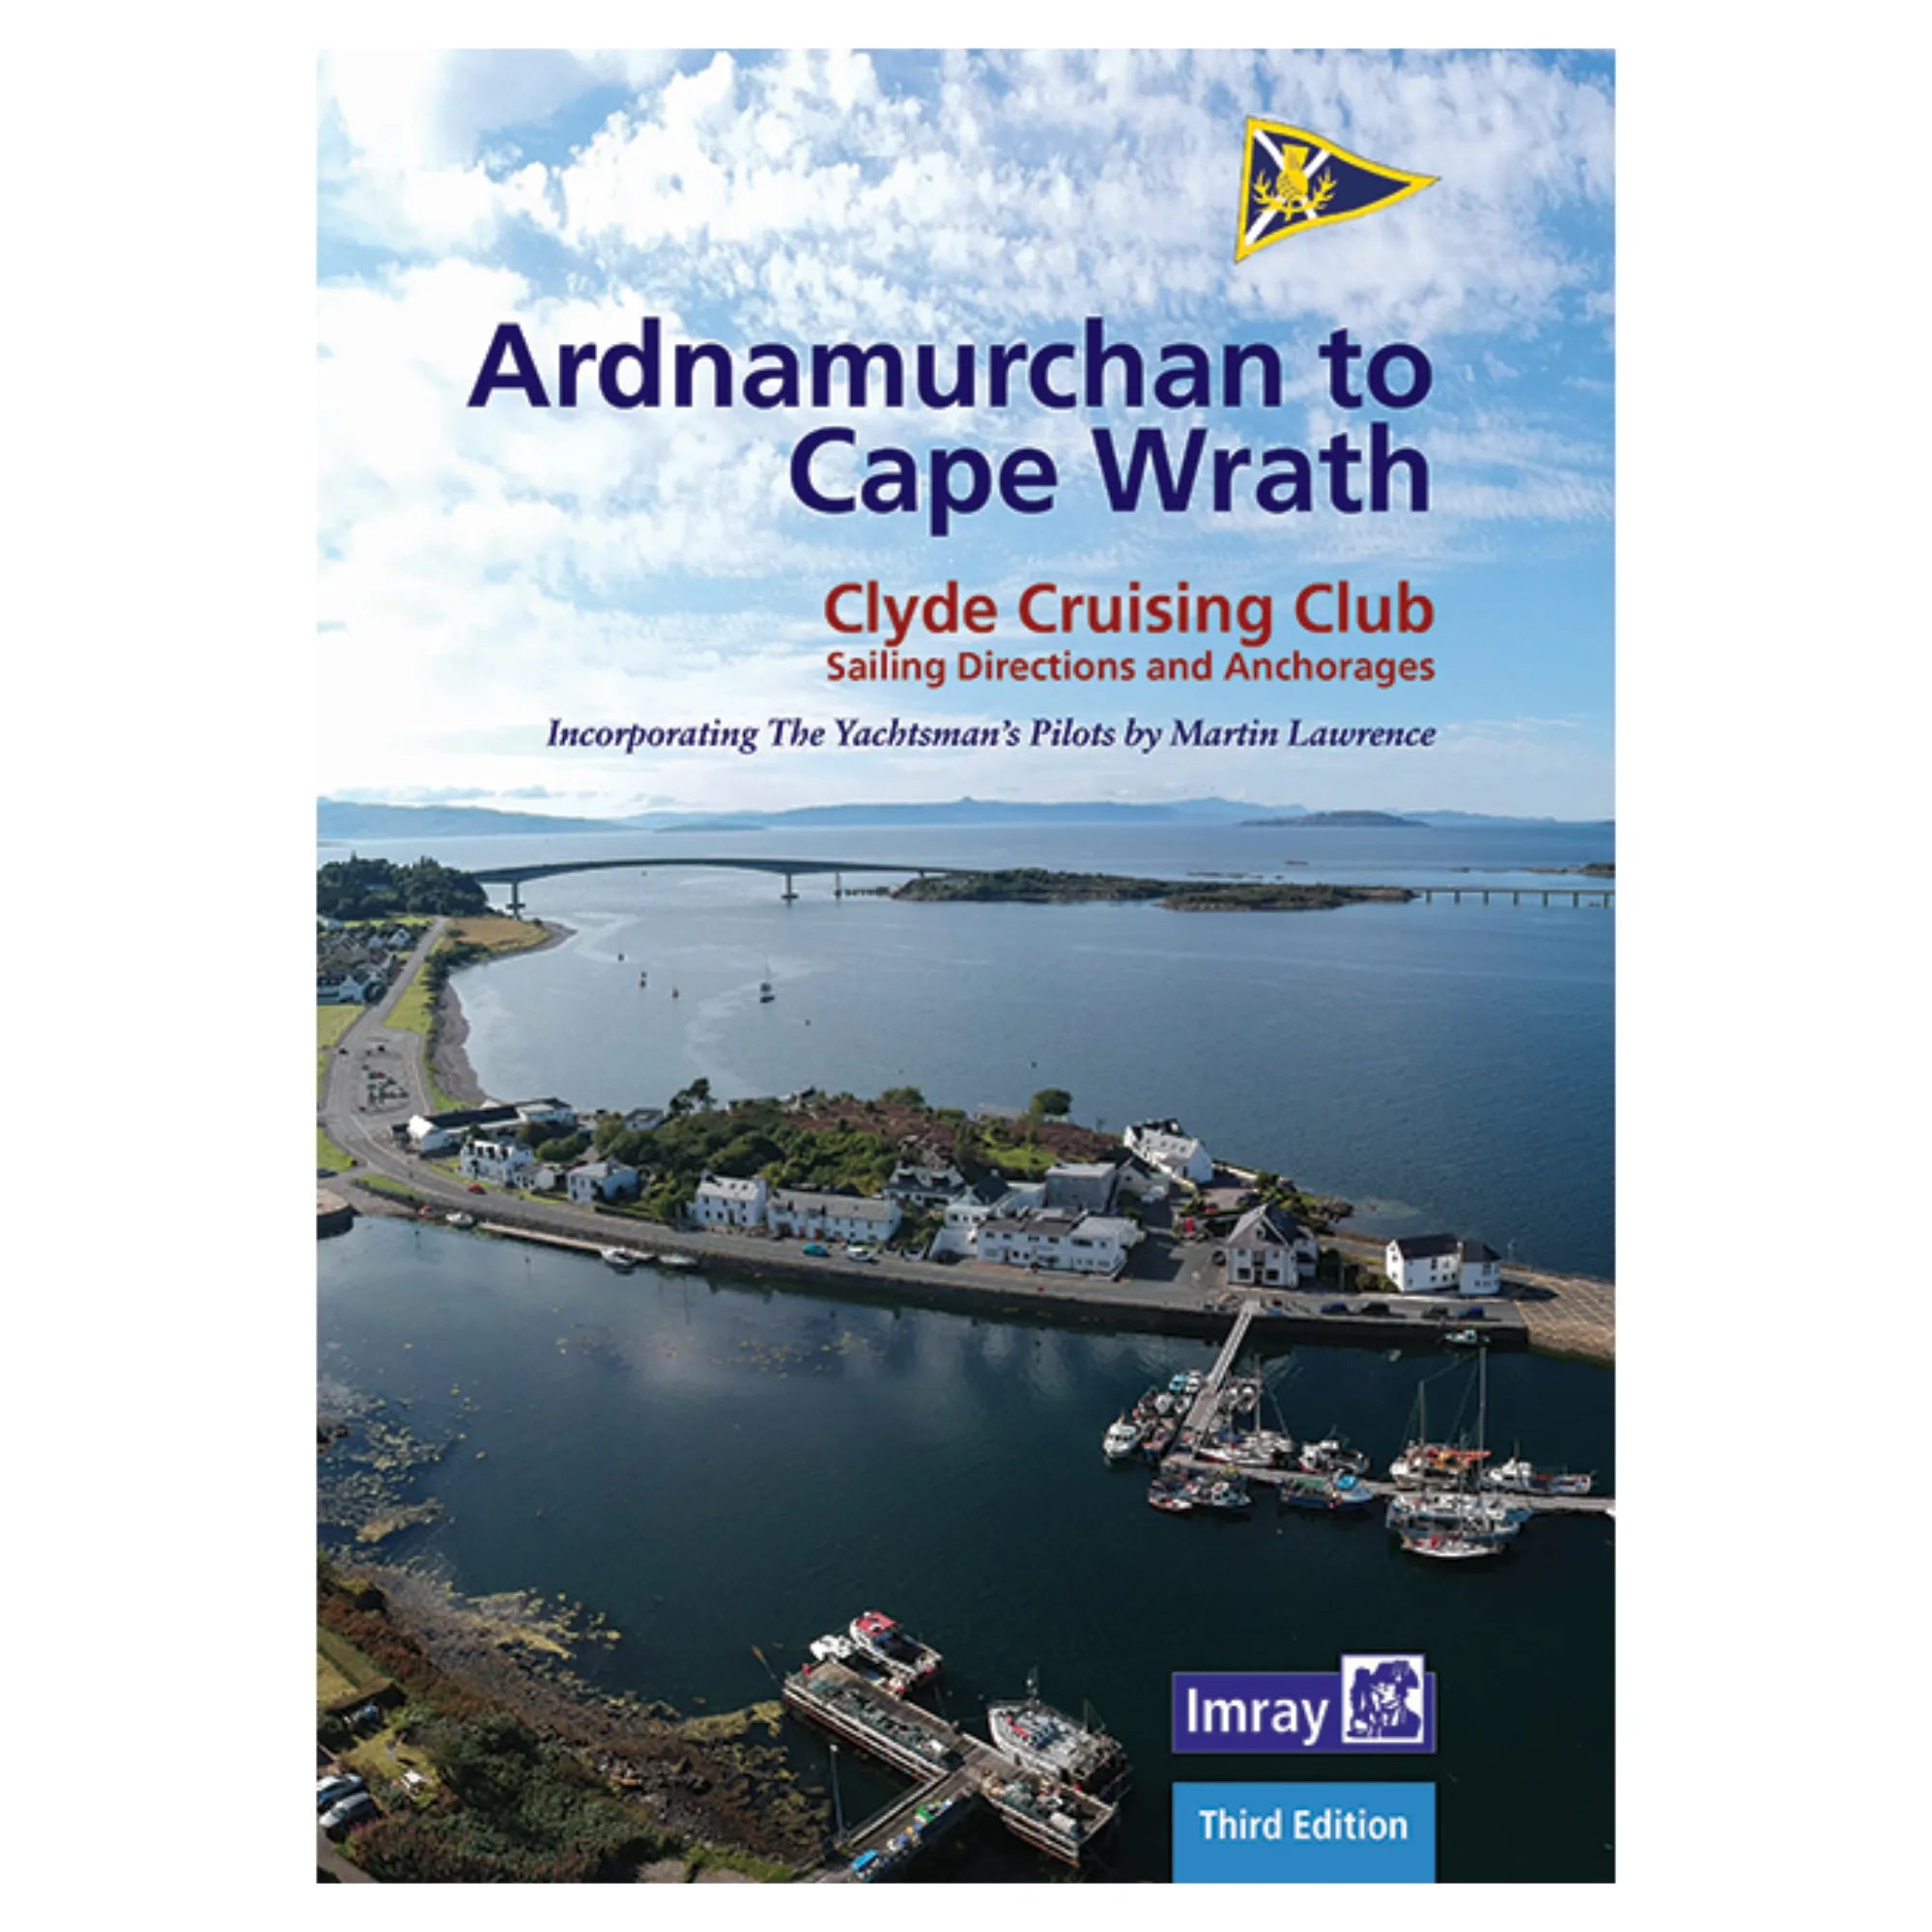 Ardnamurchan to Cape Wrath (3rd Edition)